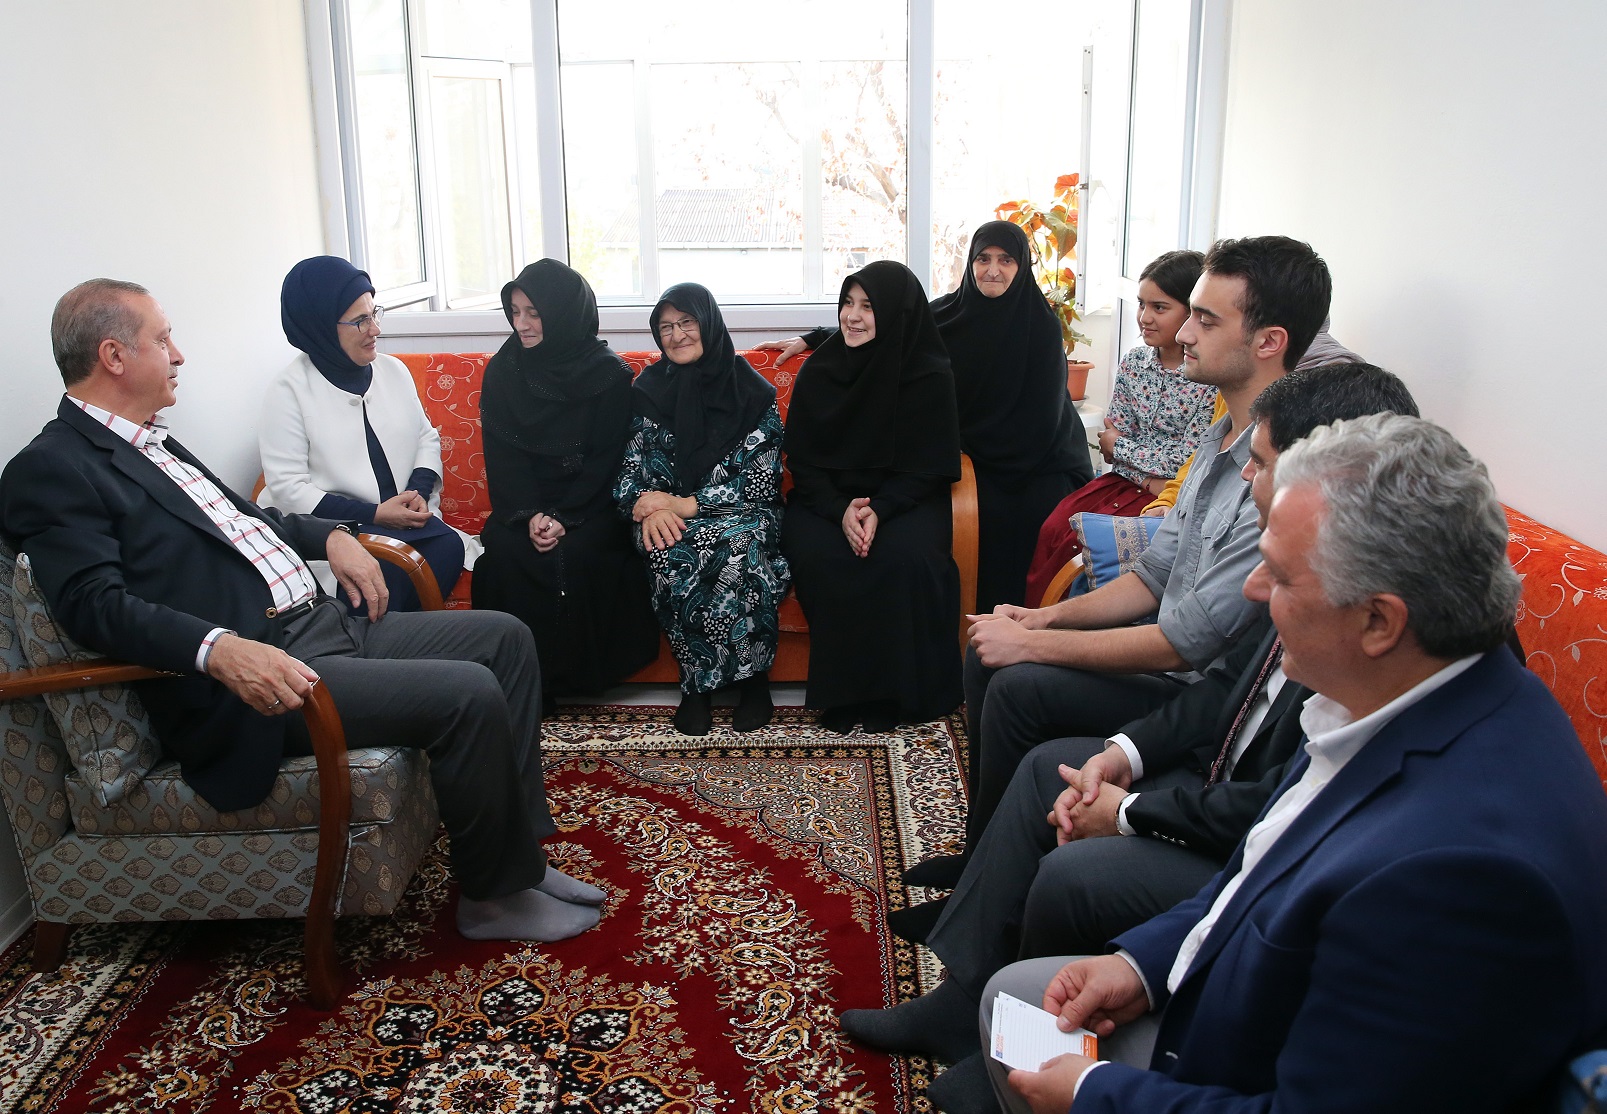 Erdoğan and Emine spoke with the Alışkan family for a while.